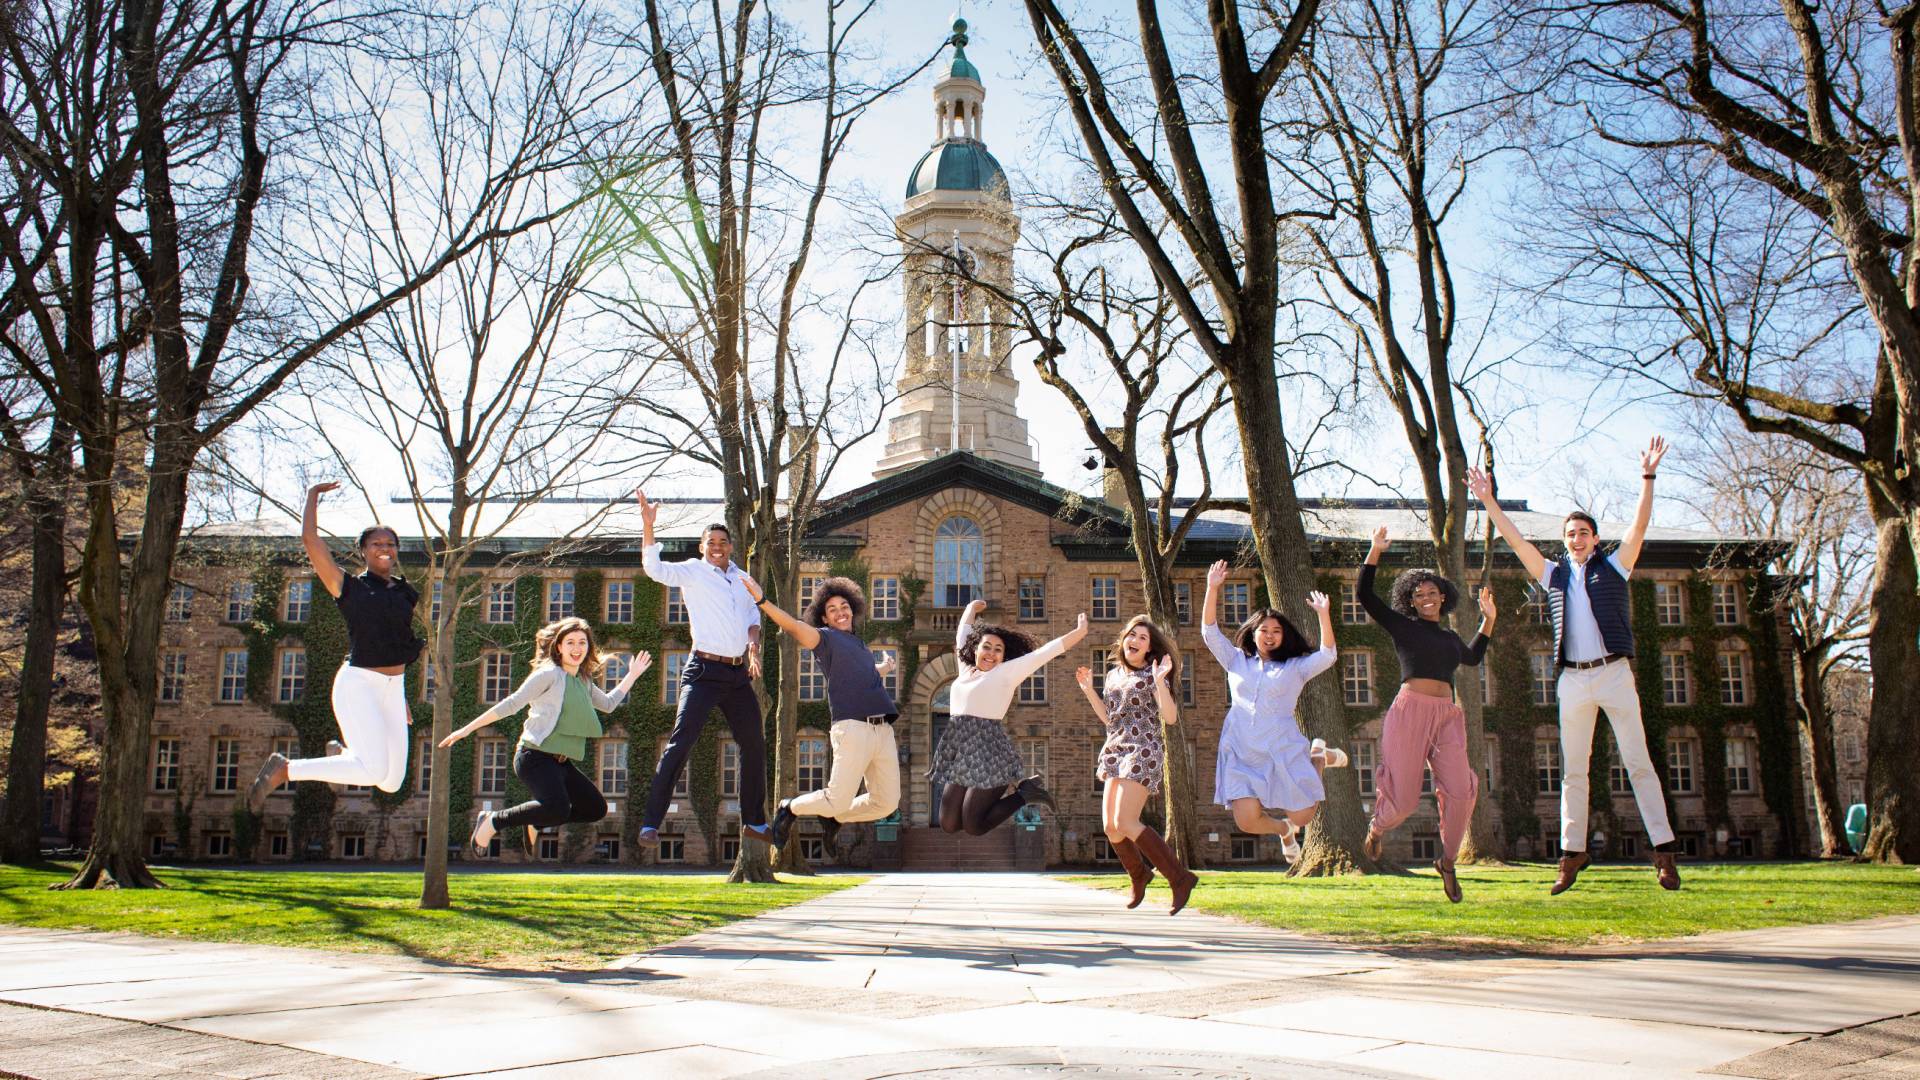 Maia Craver, Katie Tyler, Gaby Joseph, Jordan Thomas, Soraya Morales Nuñez, Allison Berger, Zoë Anne Toldedo, Christina Onianwa and Diego Negrón-Reichard leaping in the air in front of Nassau Hall